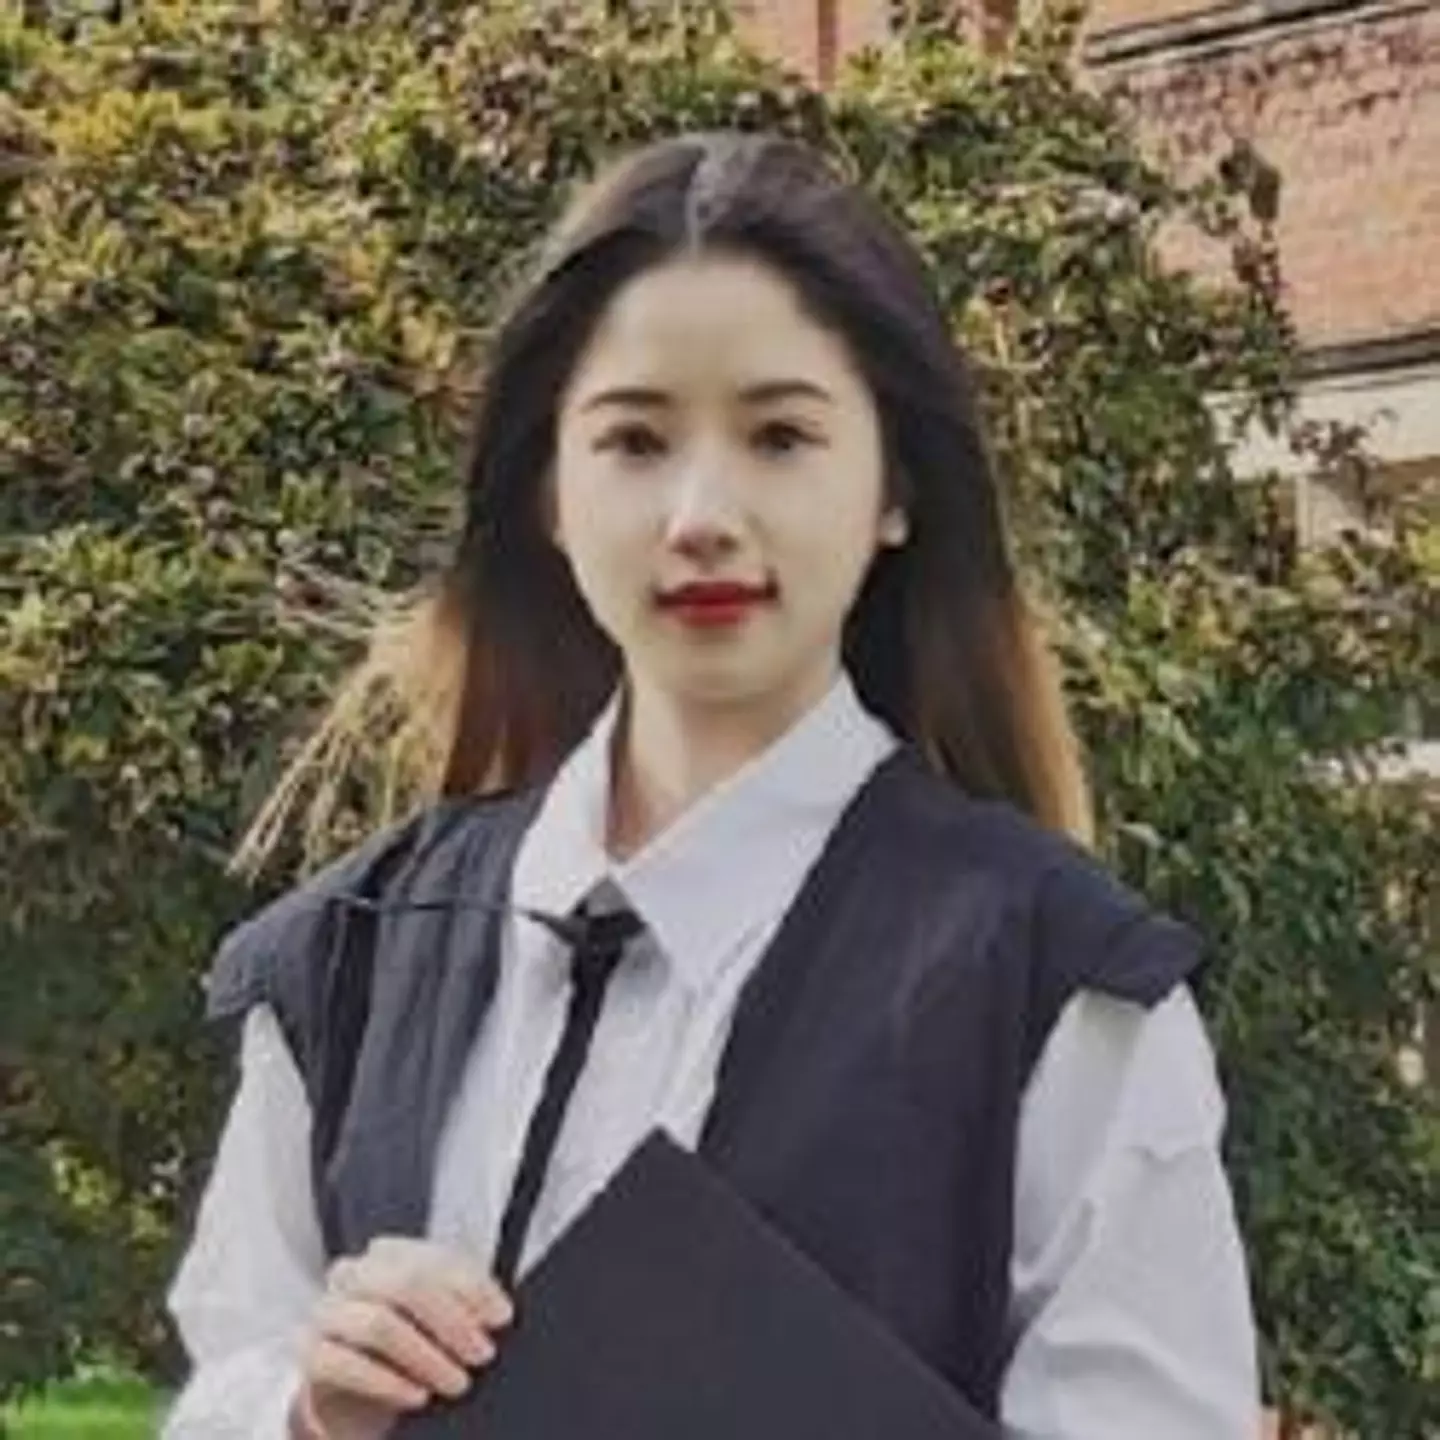 Zhu is listed on Oxford University's website as being a postgraduate student.